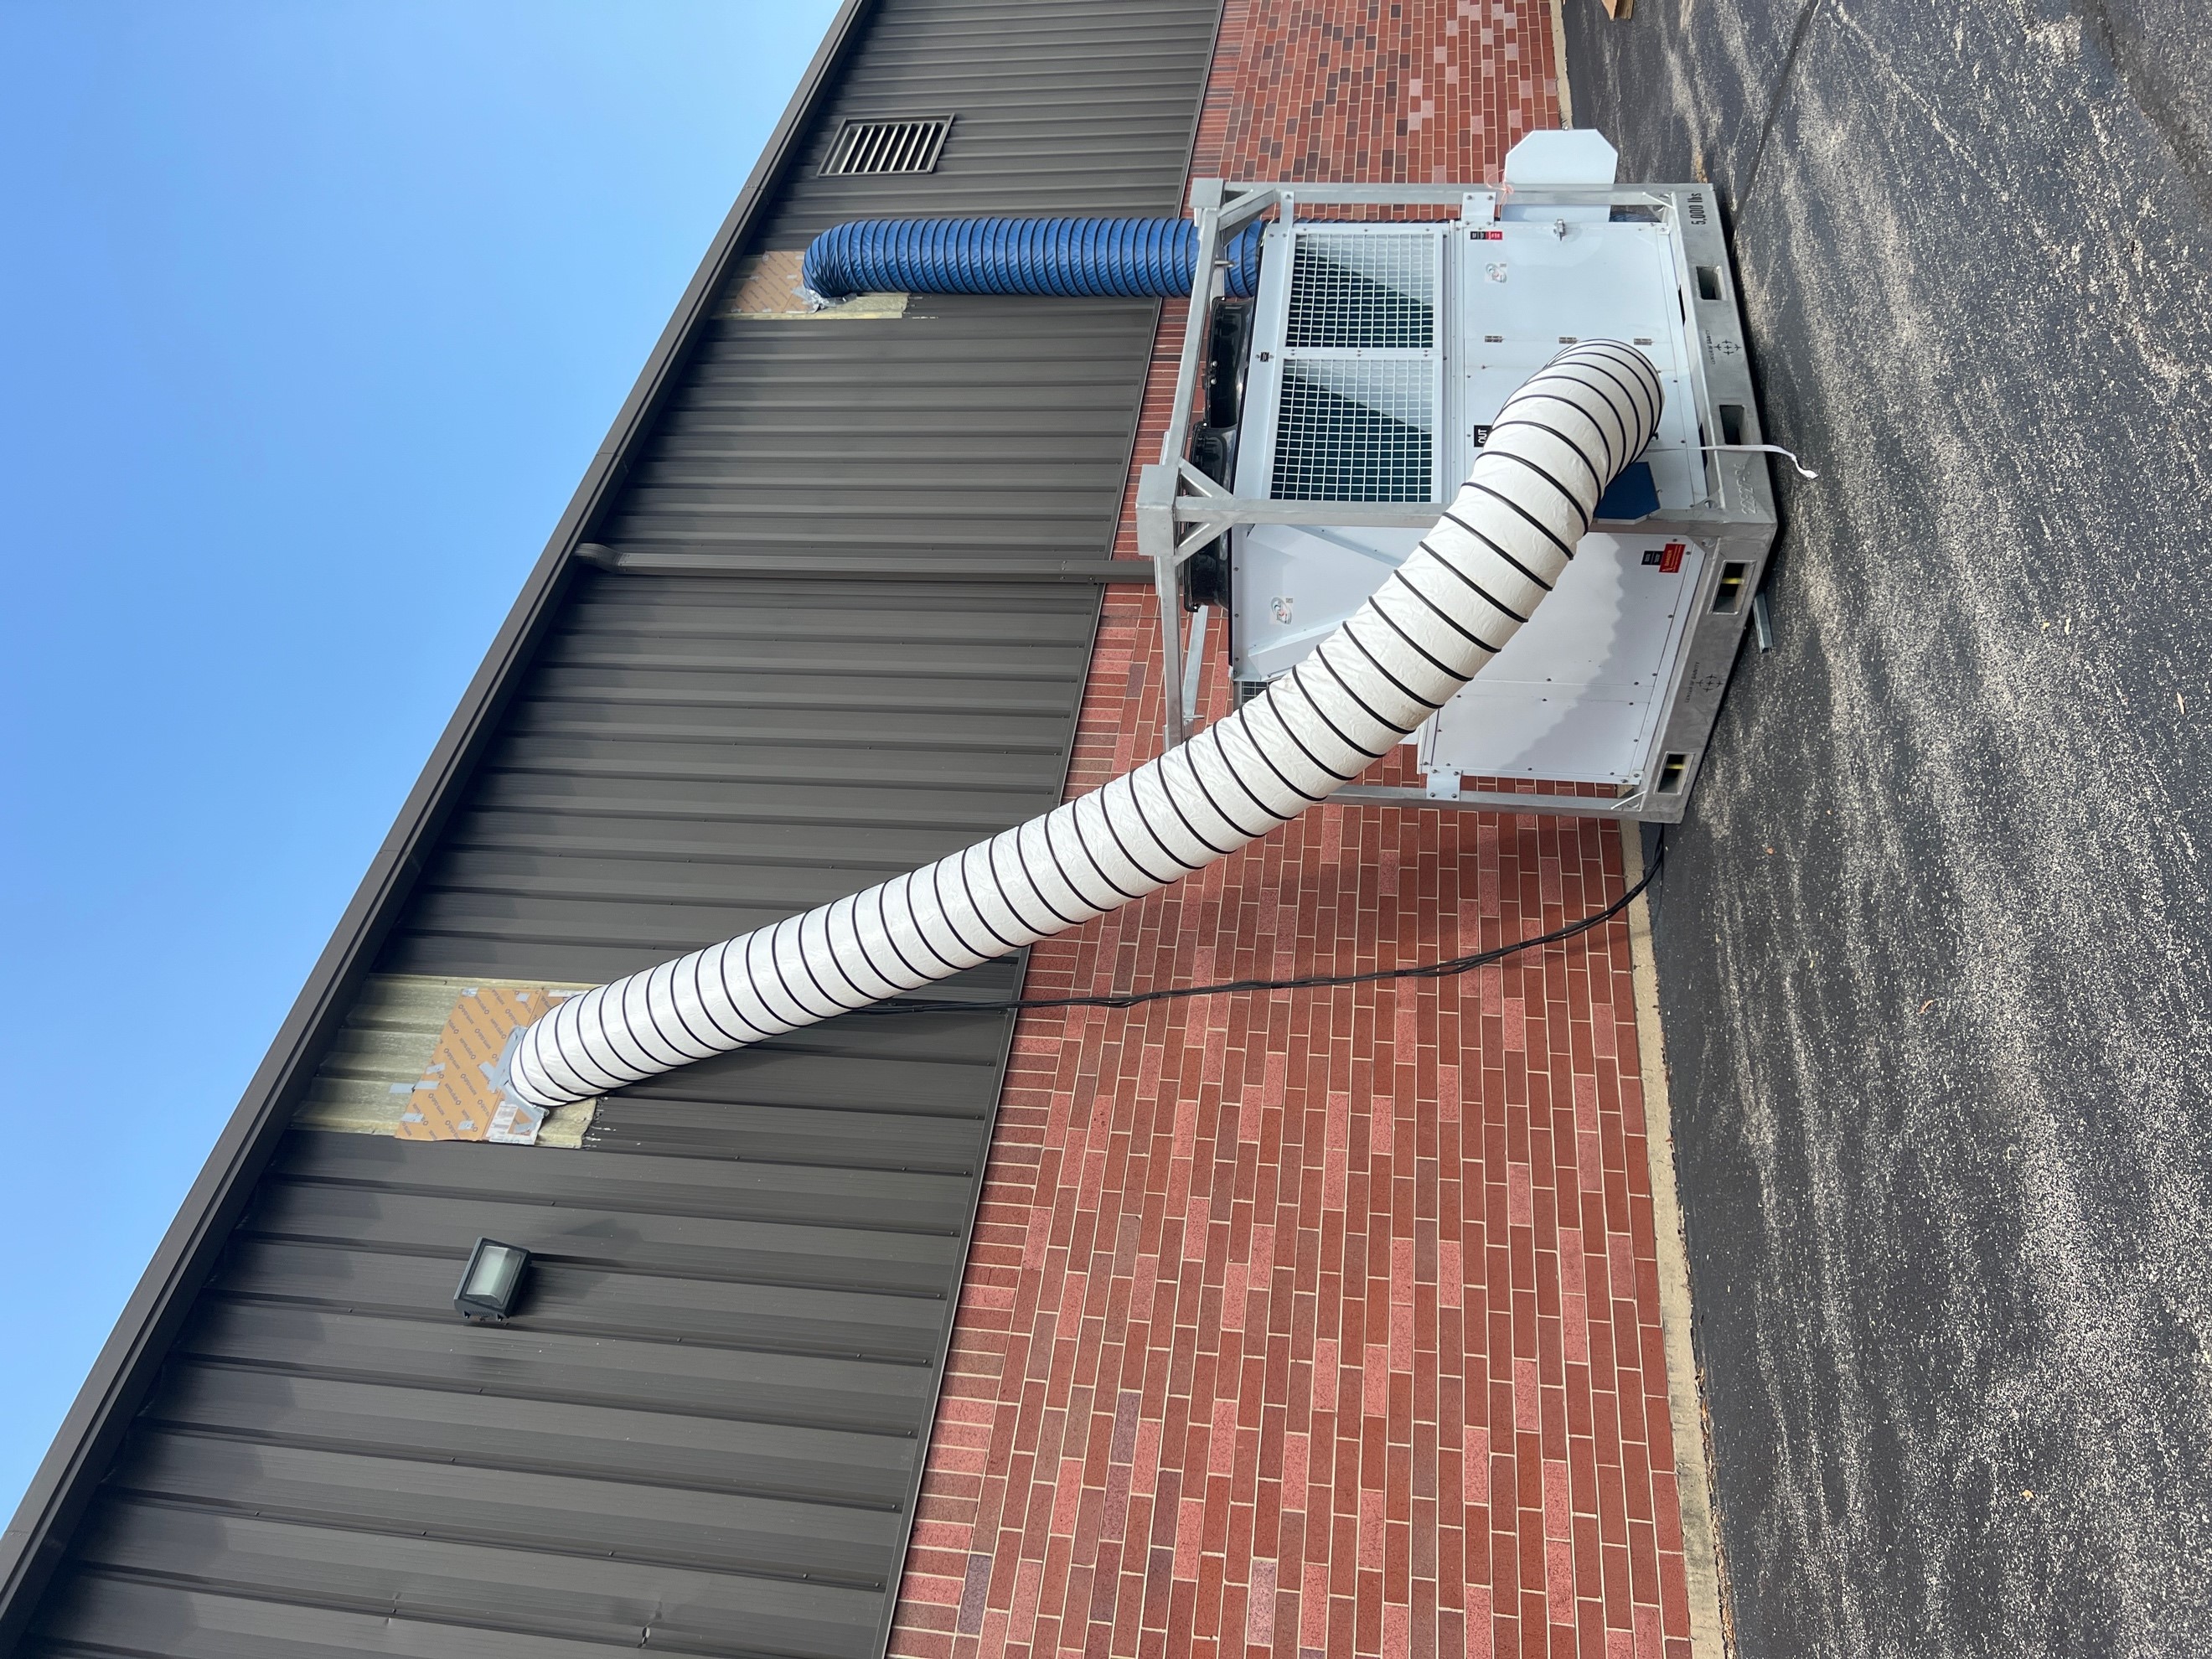 A skid mounted mobile air conditioner positioned in a parking lot ducted to two upper building openings using white and blue ductwork. 